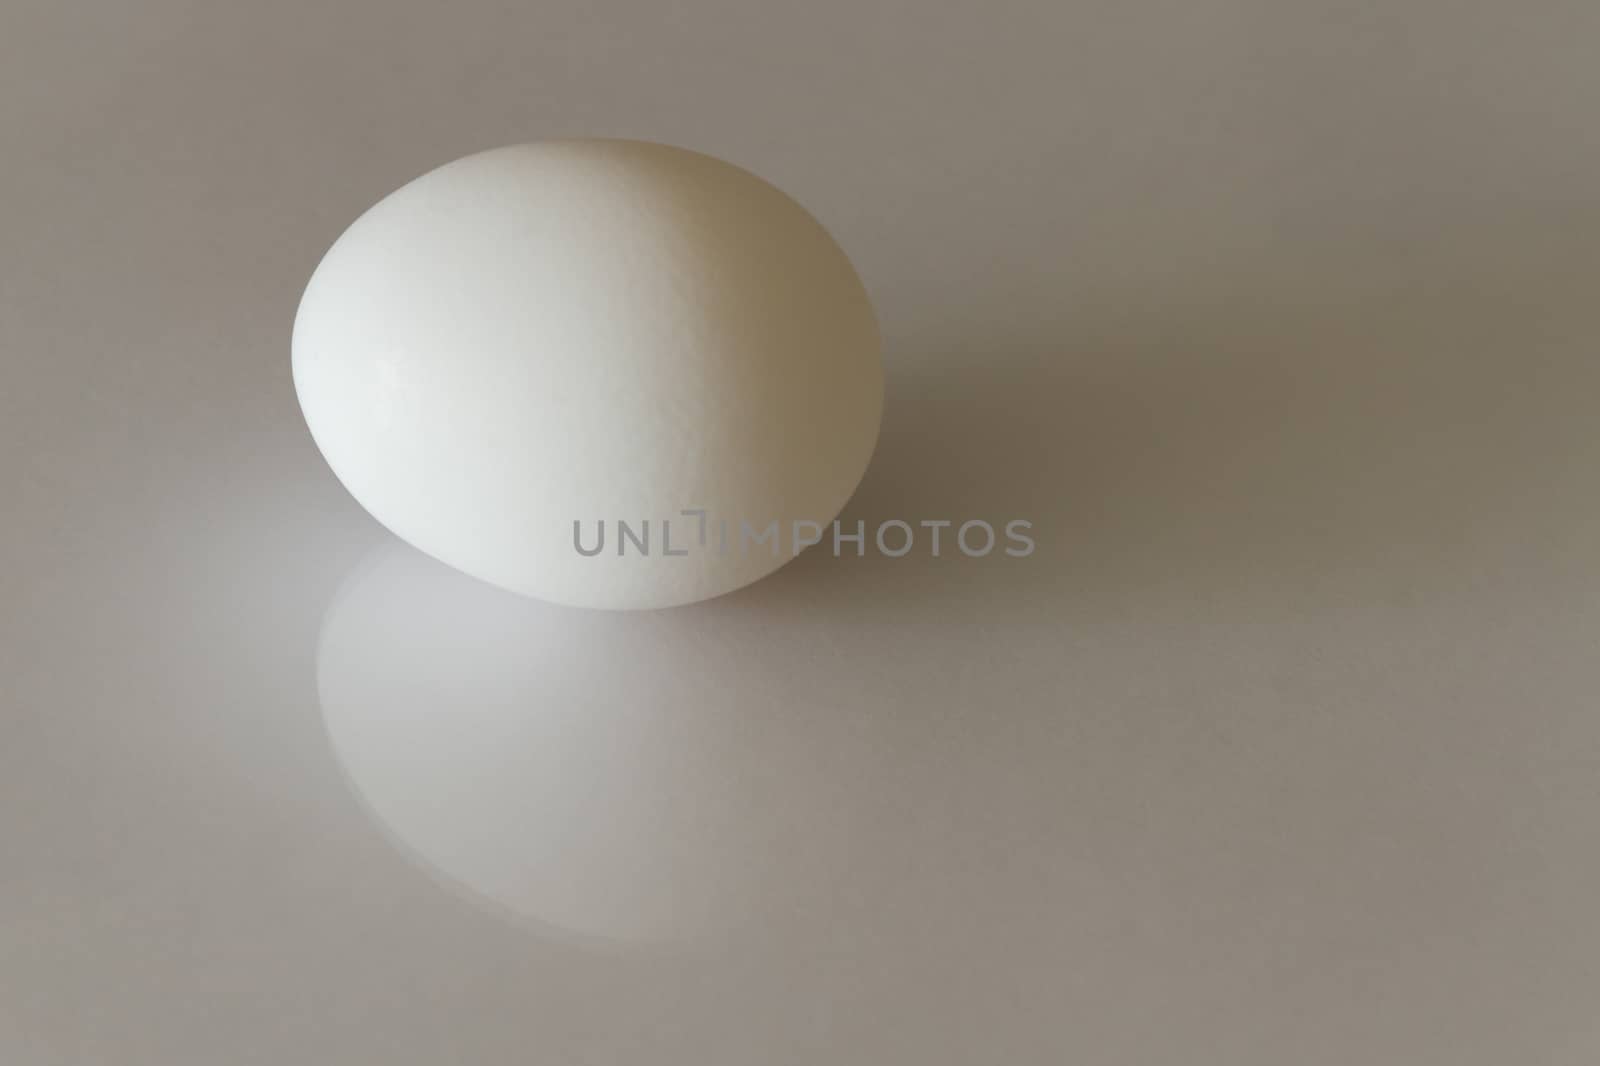 A single egg against a light background